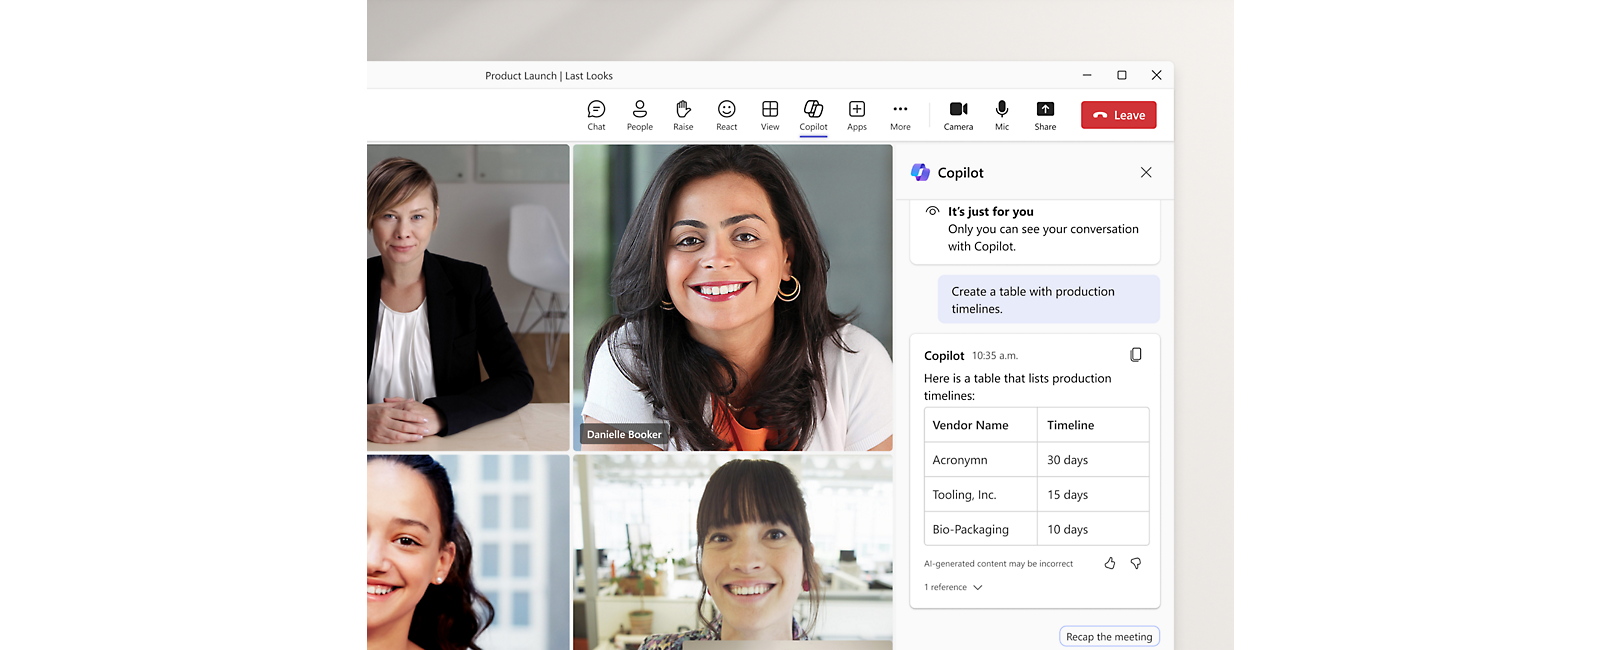 Video call shown in Microsoft Teams meeting with Microsoft Copilot opened in right side collating the meeting information